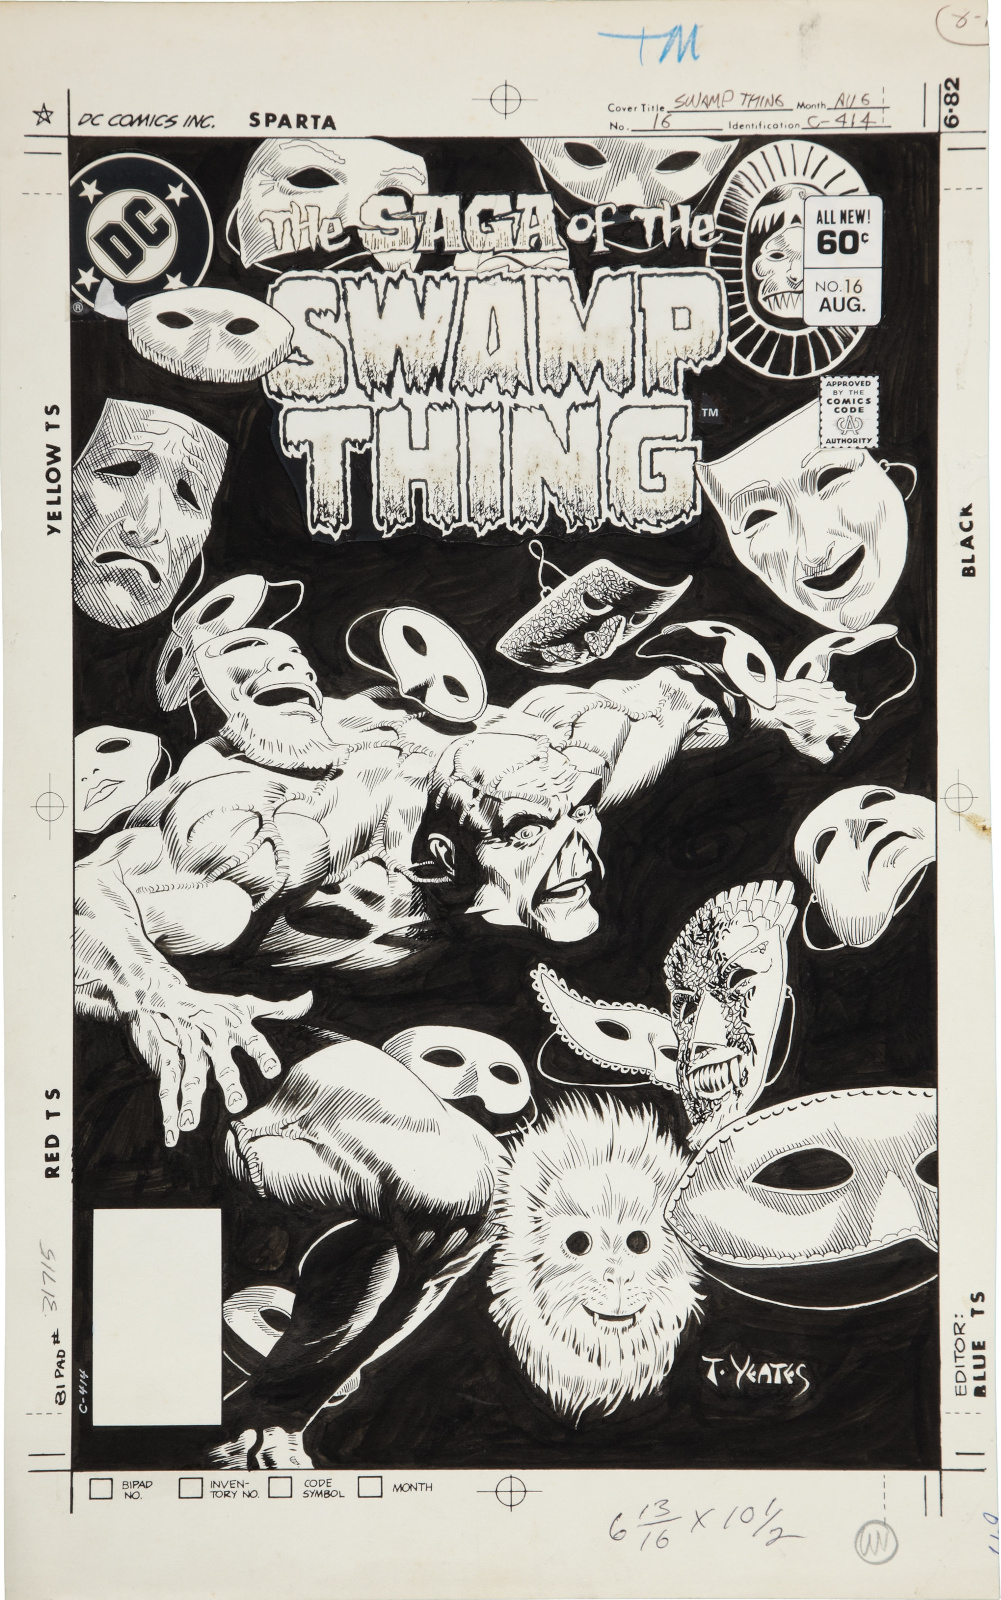 Saga of the Swamp Thing issue 16 cover by Tom Yeates